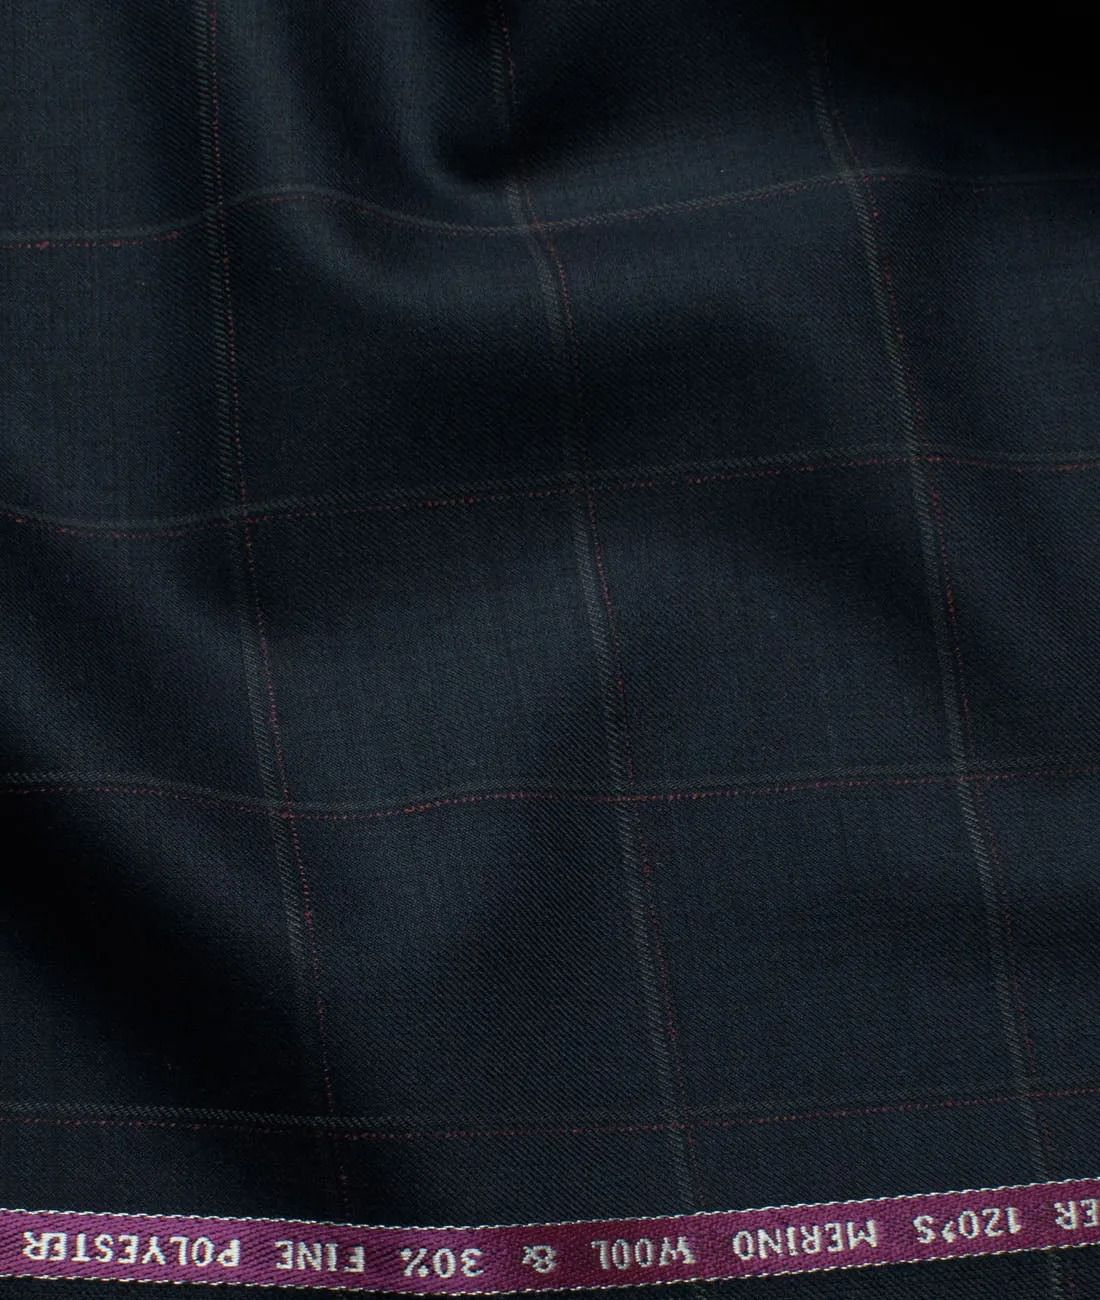 Wool Checks Super 120GÇÖs Unstitched Suiting Fabric Dark Blue base with Mauve & Green Checks Casual, Semi-Formal & Occasional